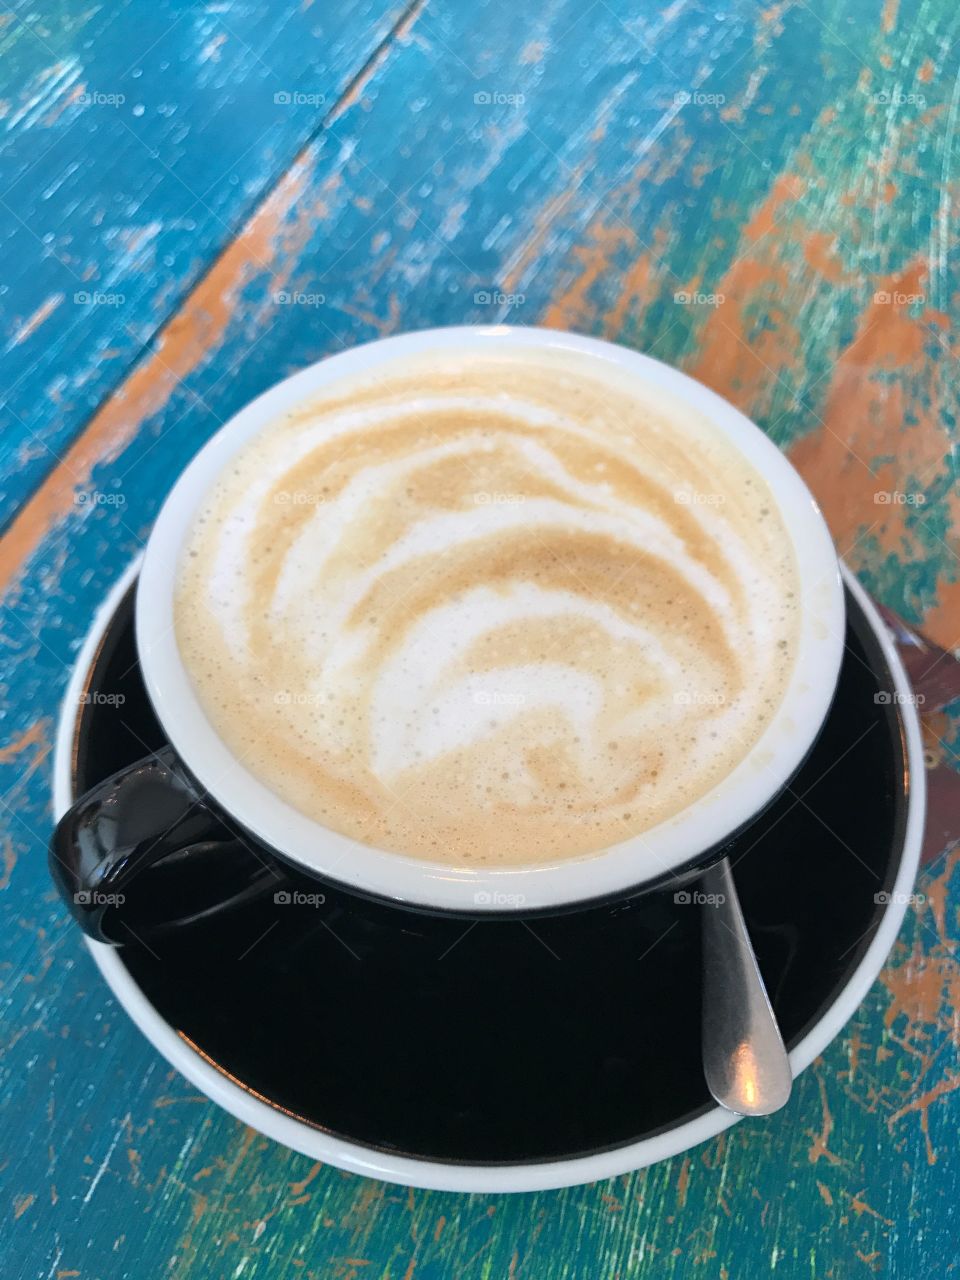 Cup of coffee latte